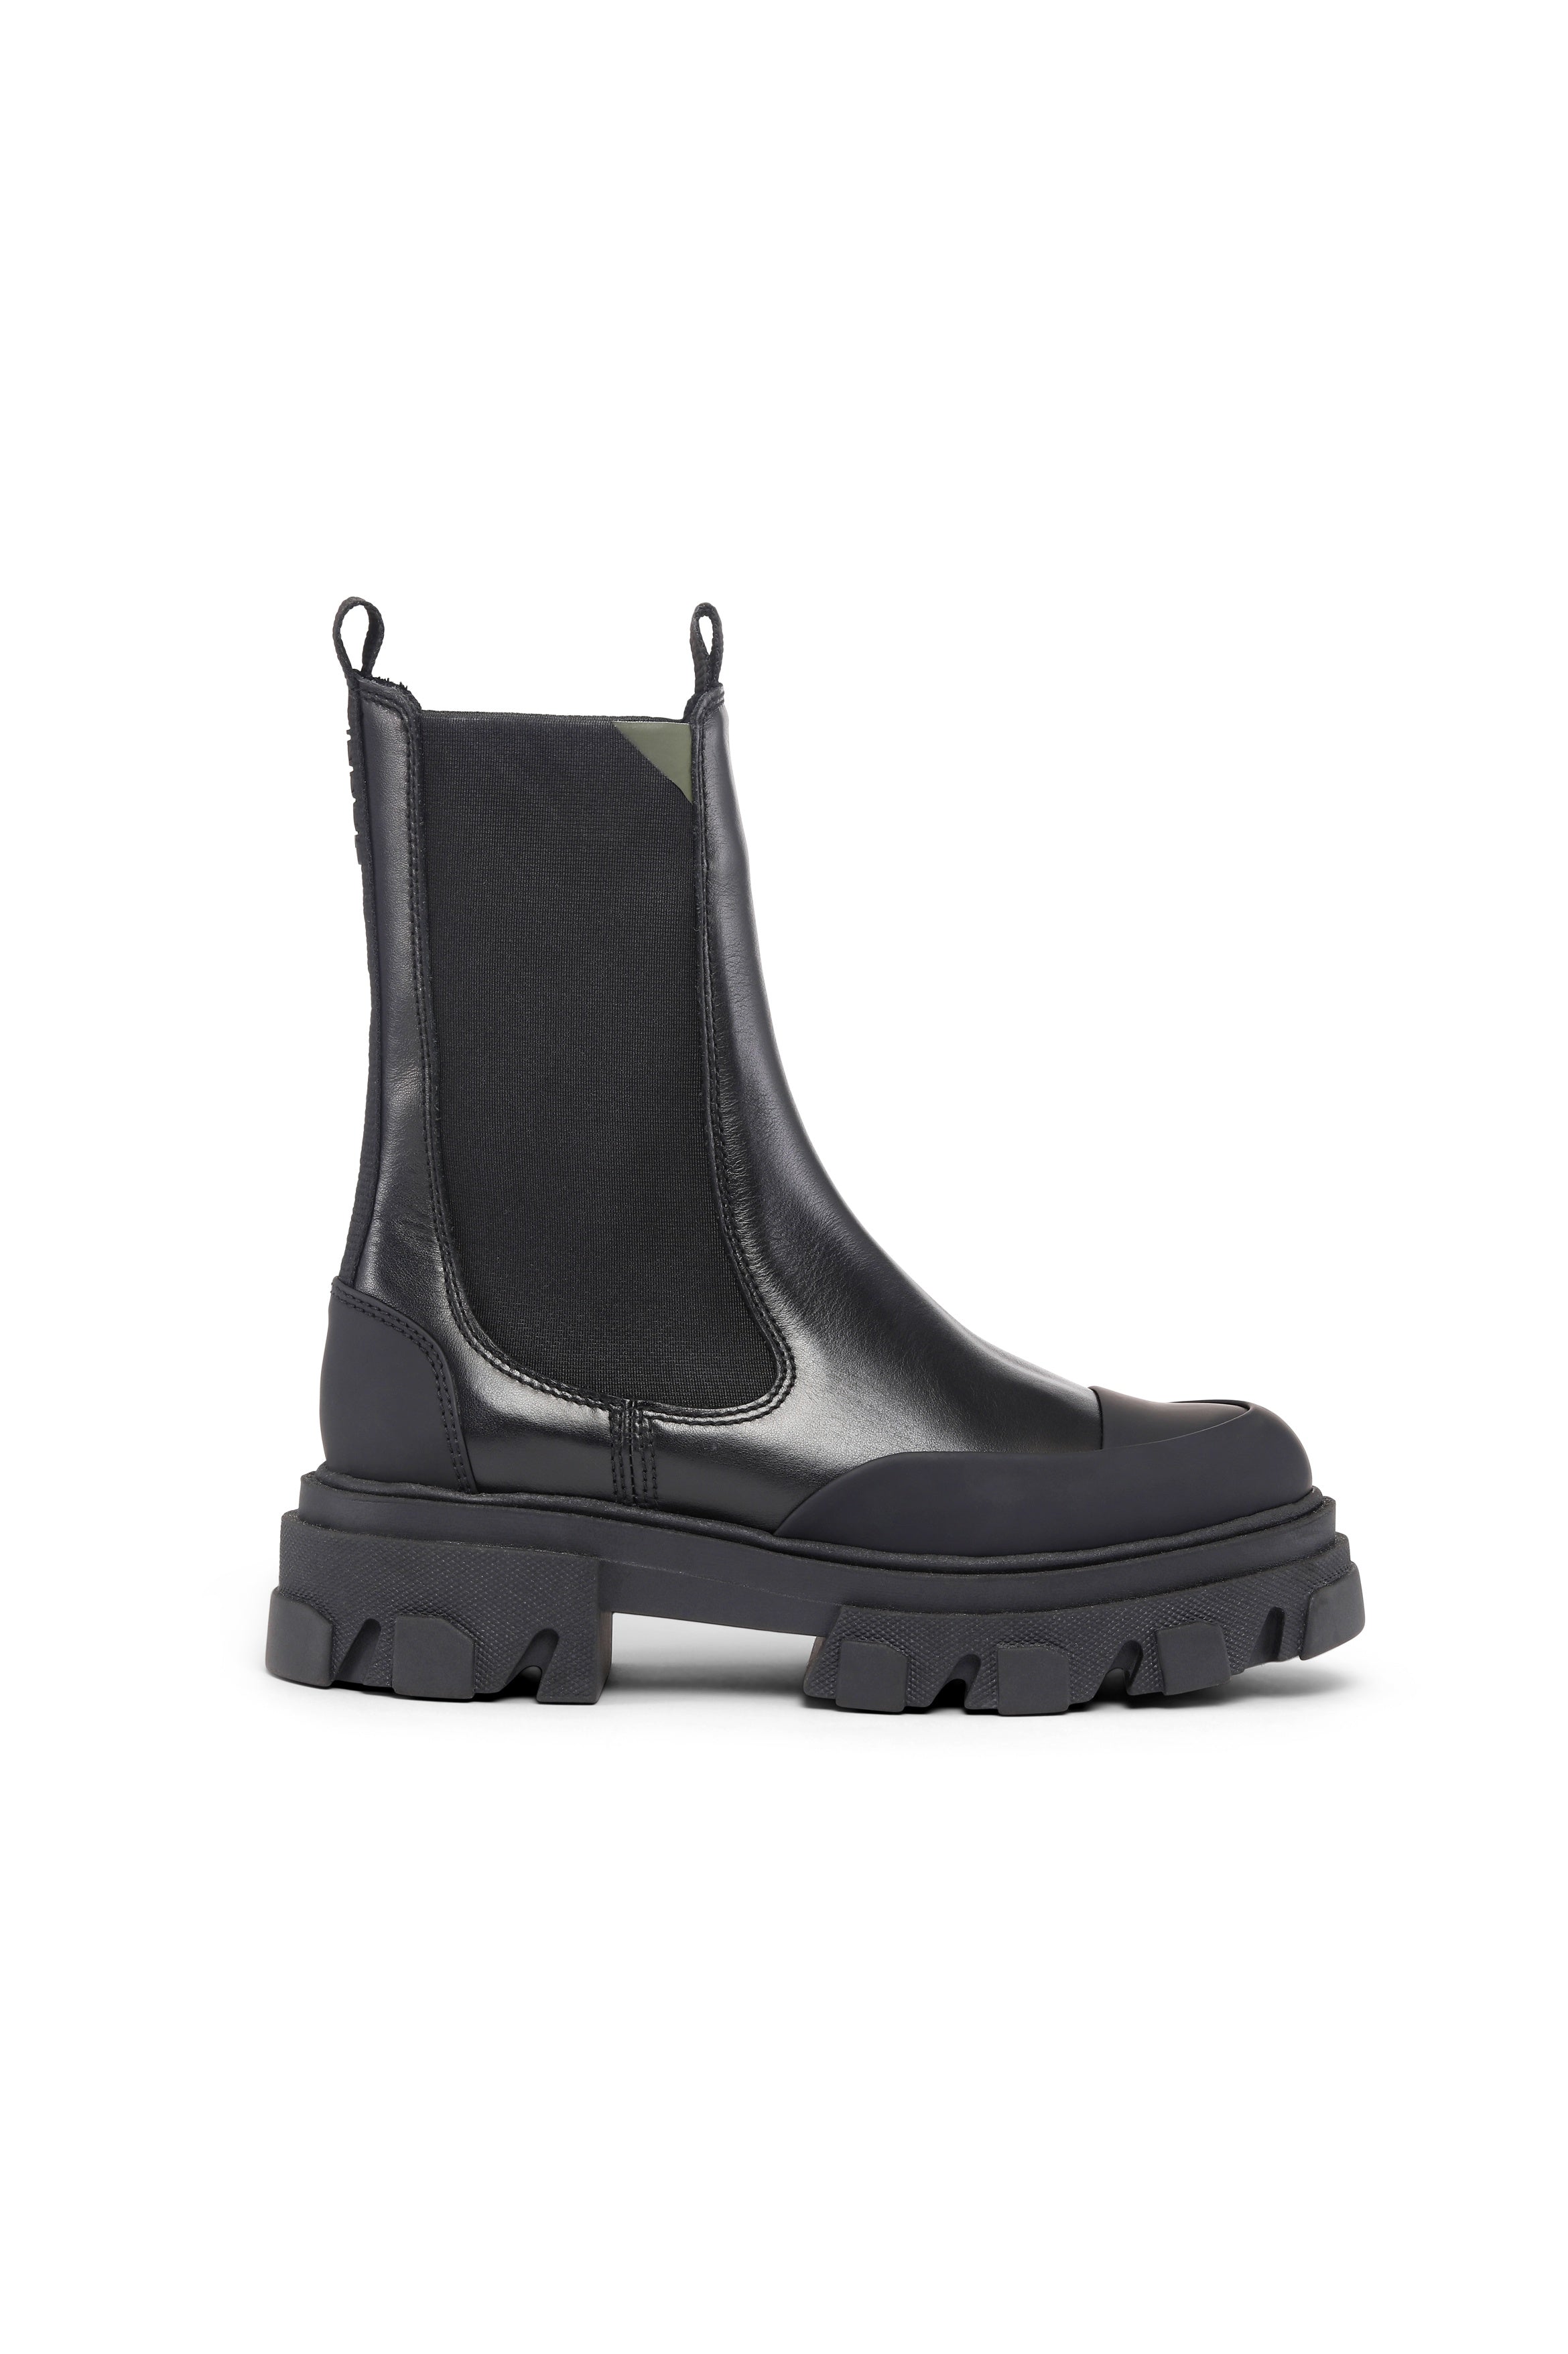 GANNI S1548 Chelsea Boot in Black Leather